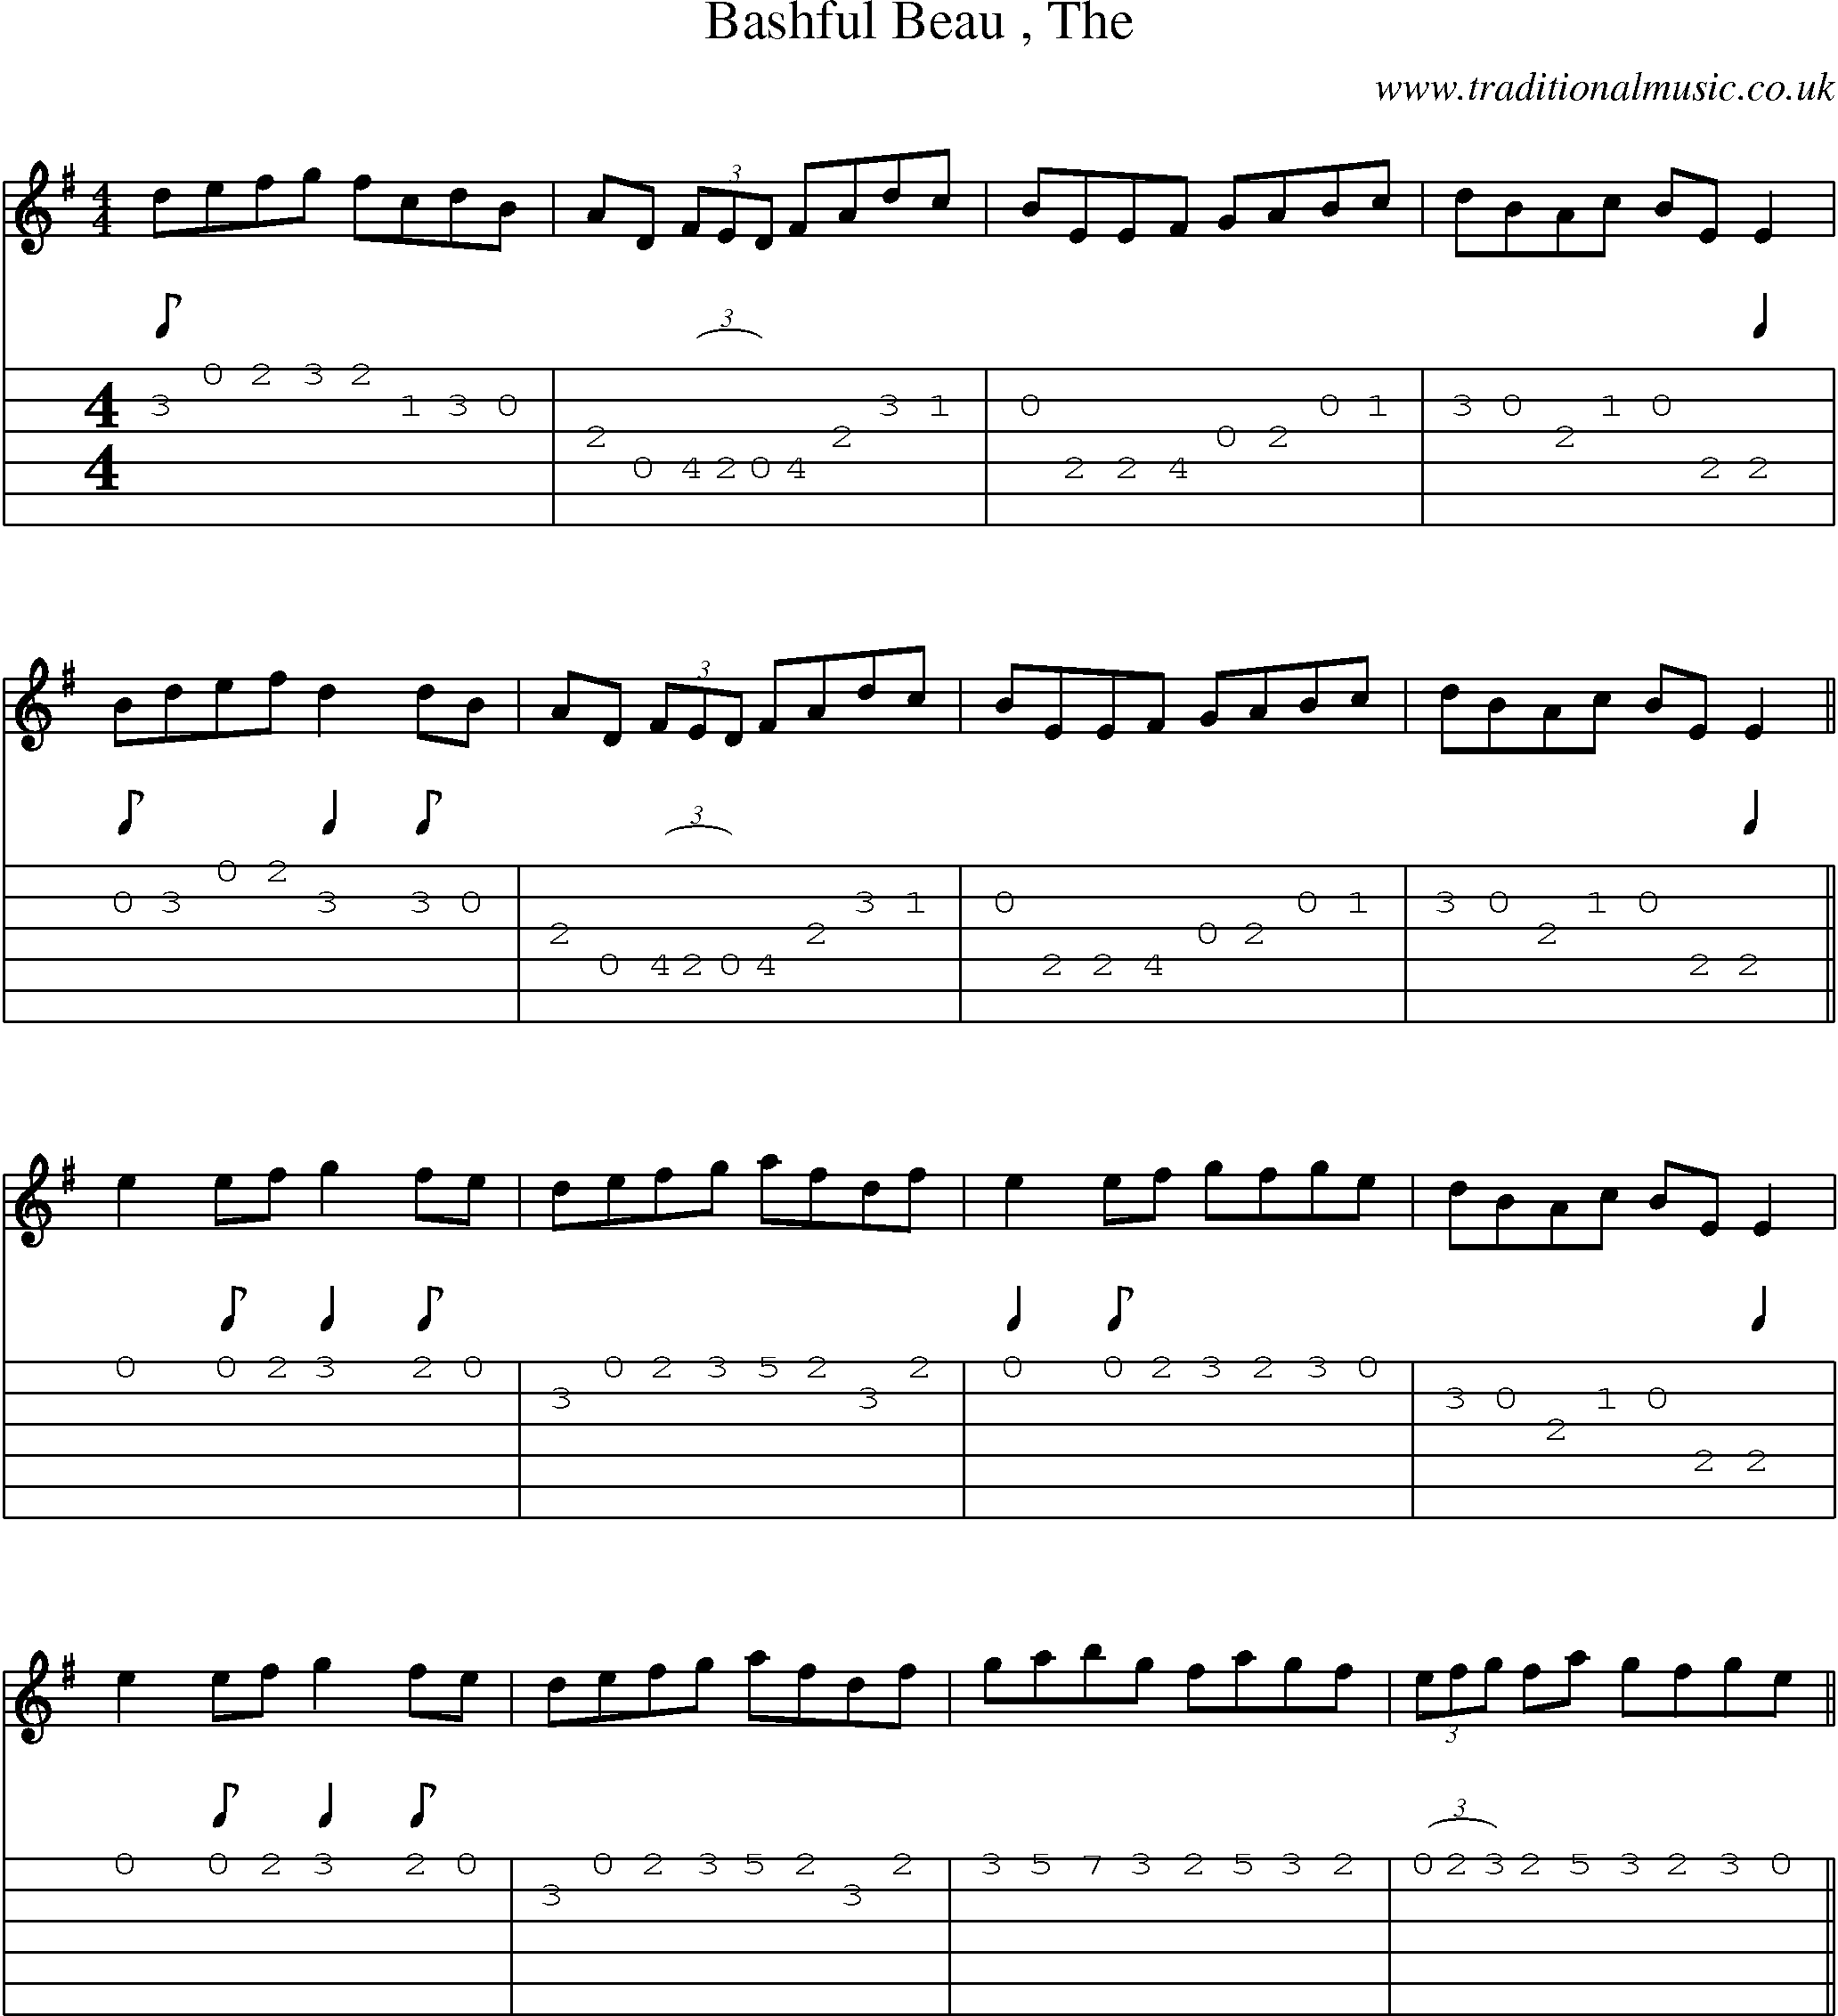 Music Score and Guitar Tabs for Bashful Beau